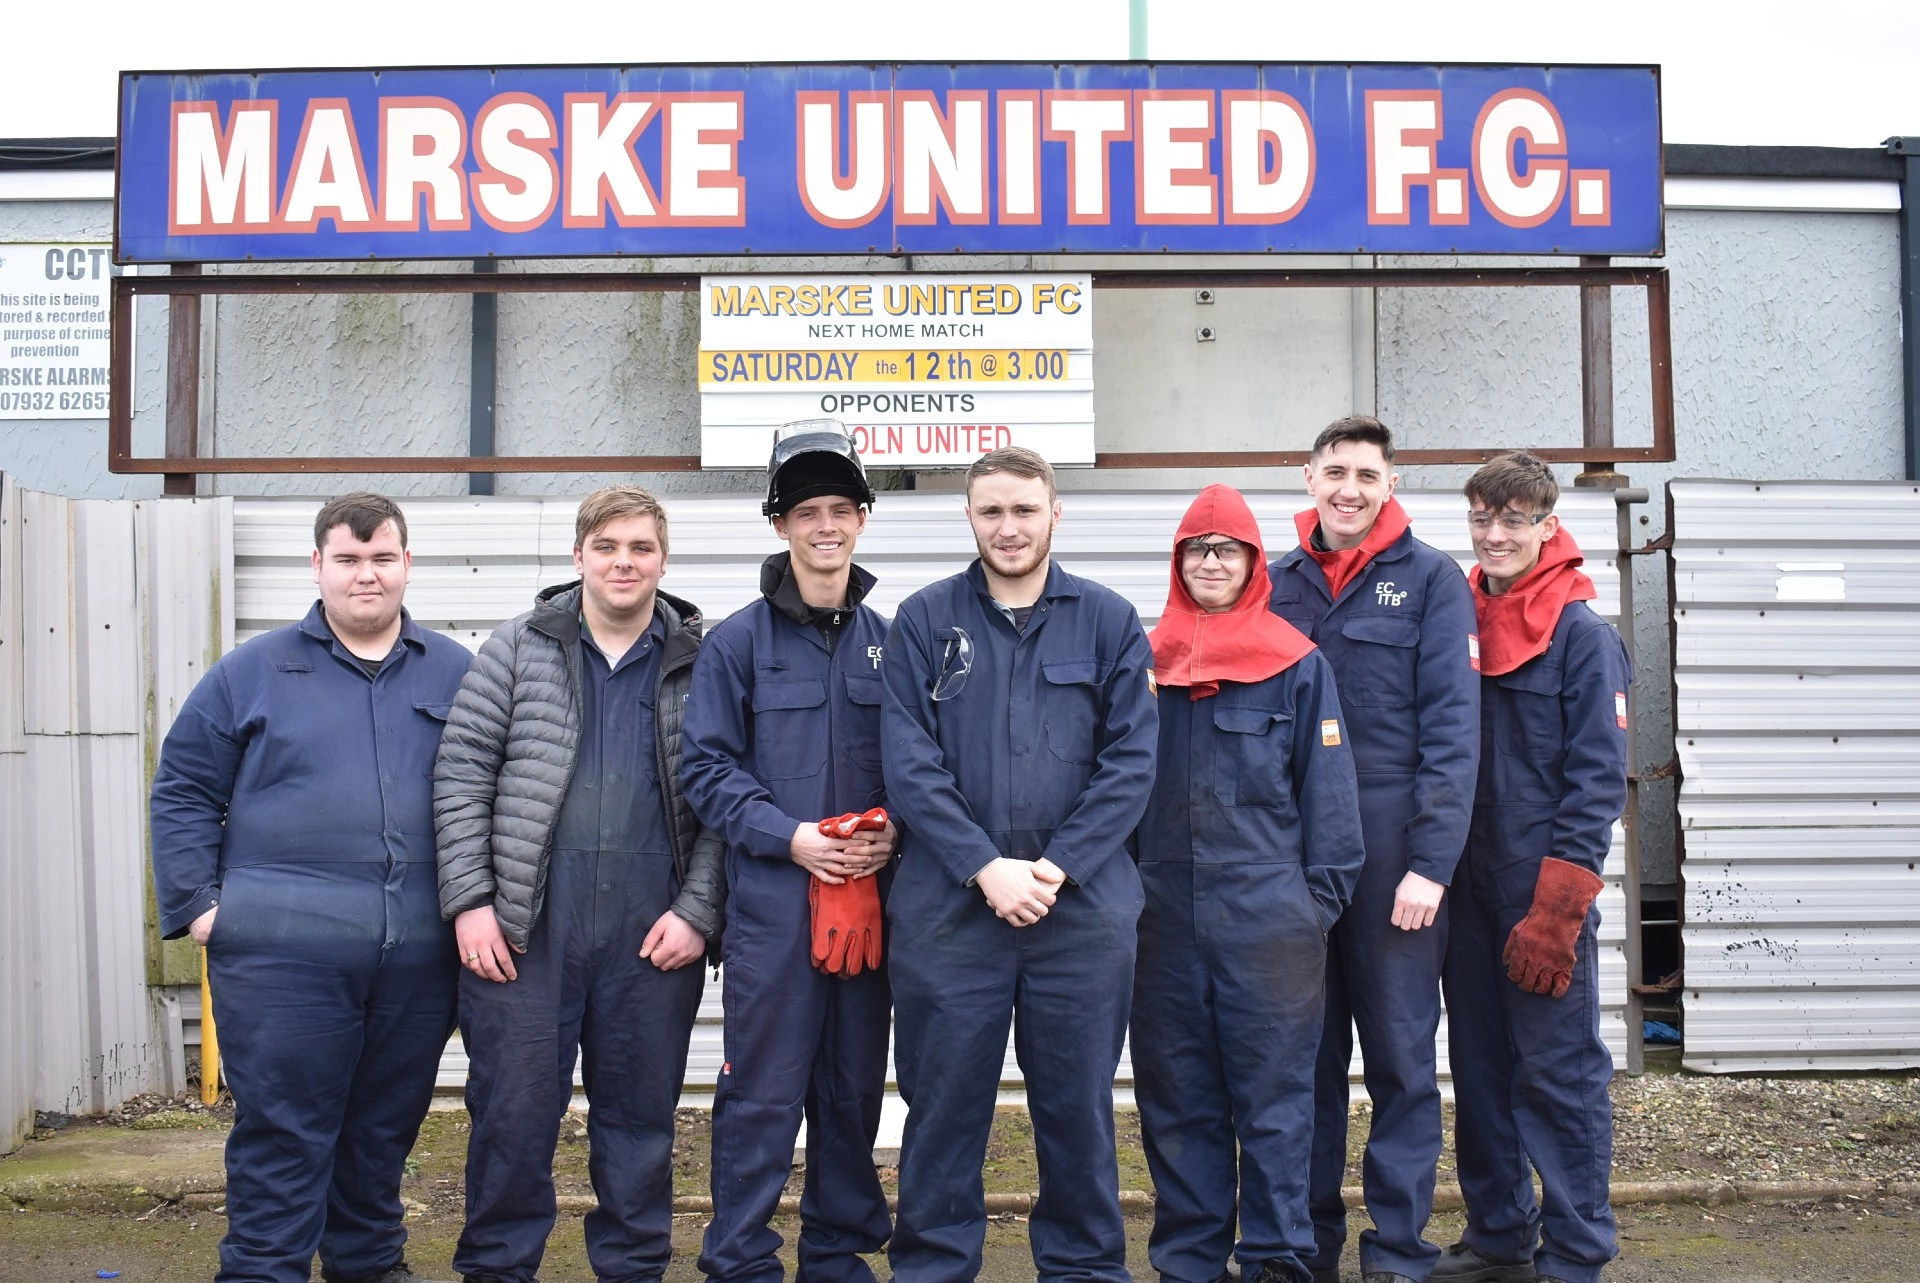 Students and apprentices at NETA Training offer Marske United FC a helping hand